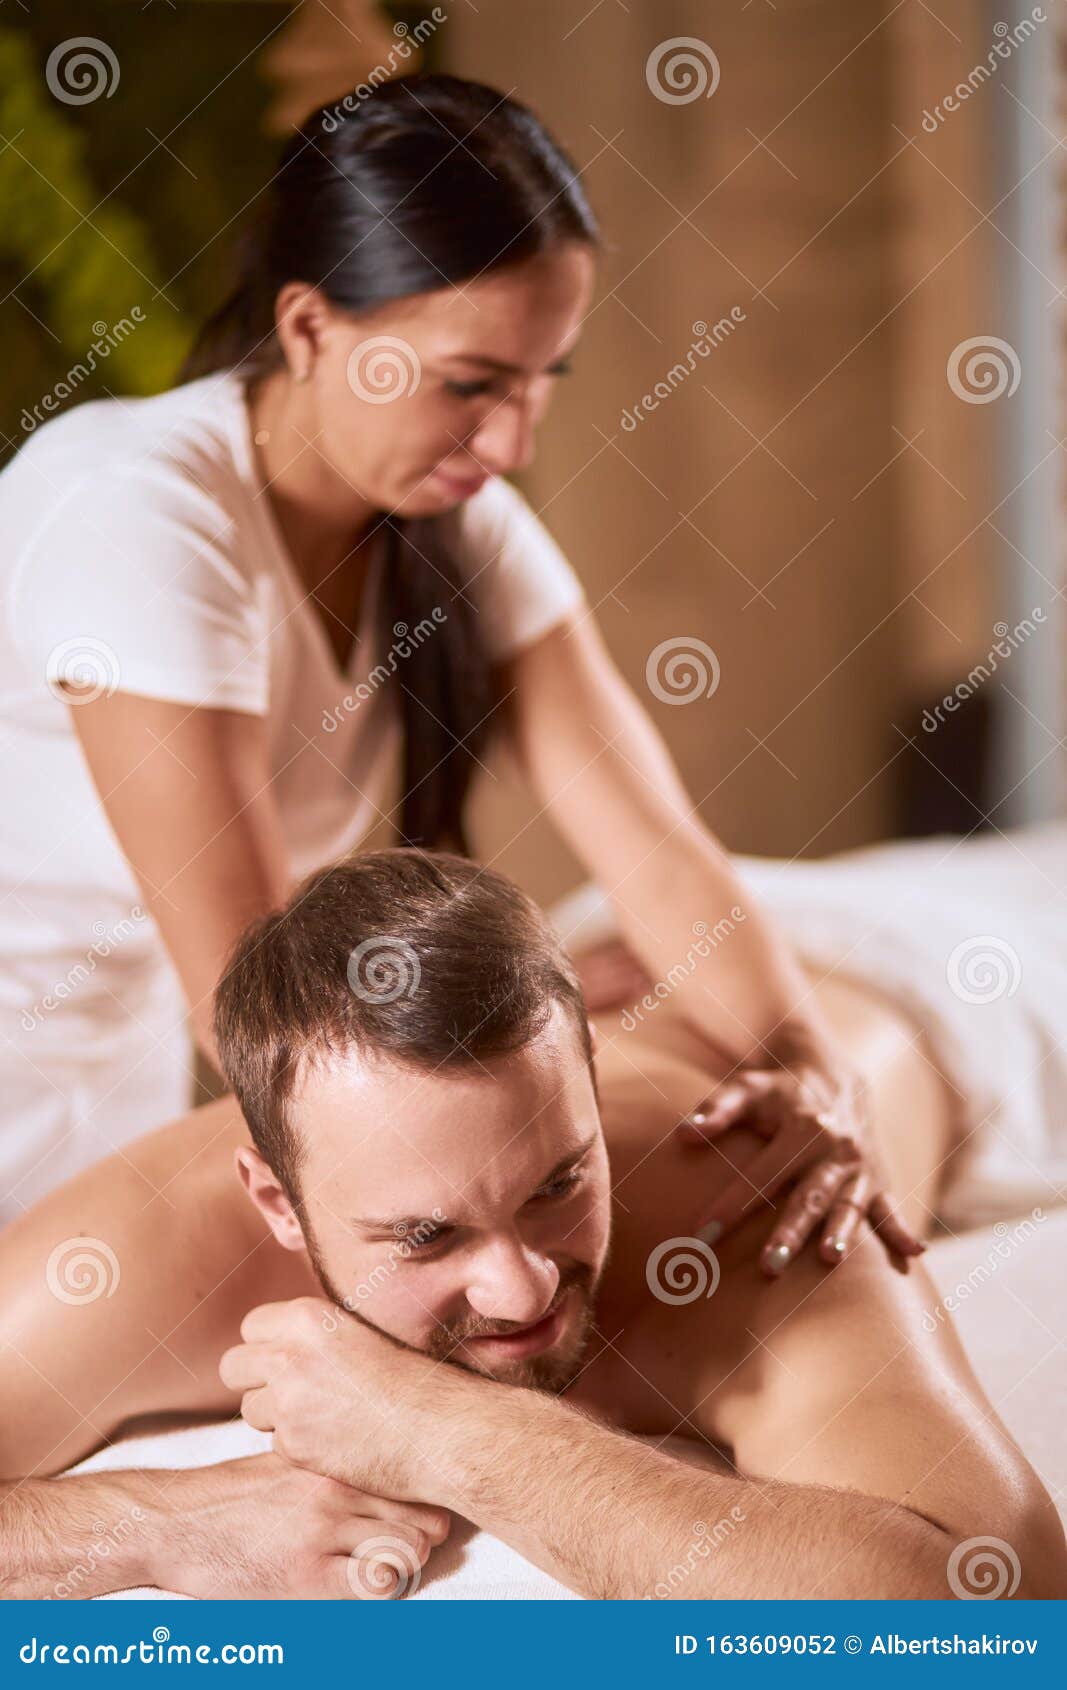 Female hands do a back massage to a man in the salon. Stock Photo by puhimec